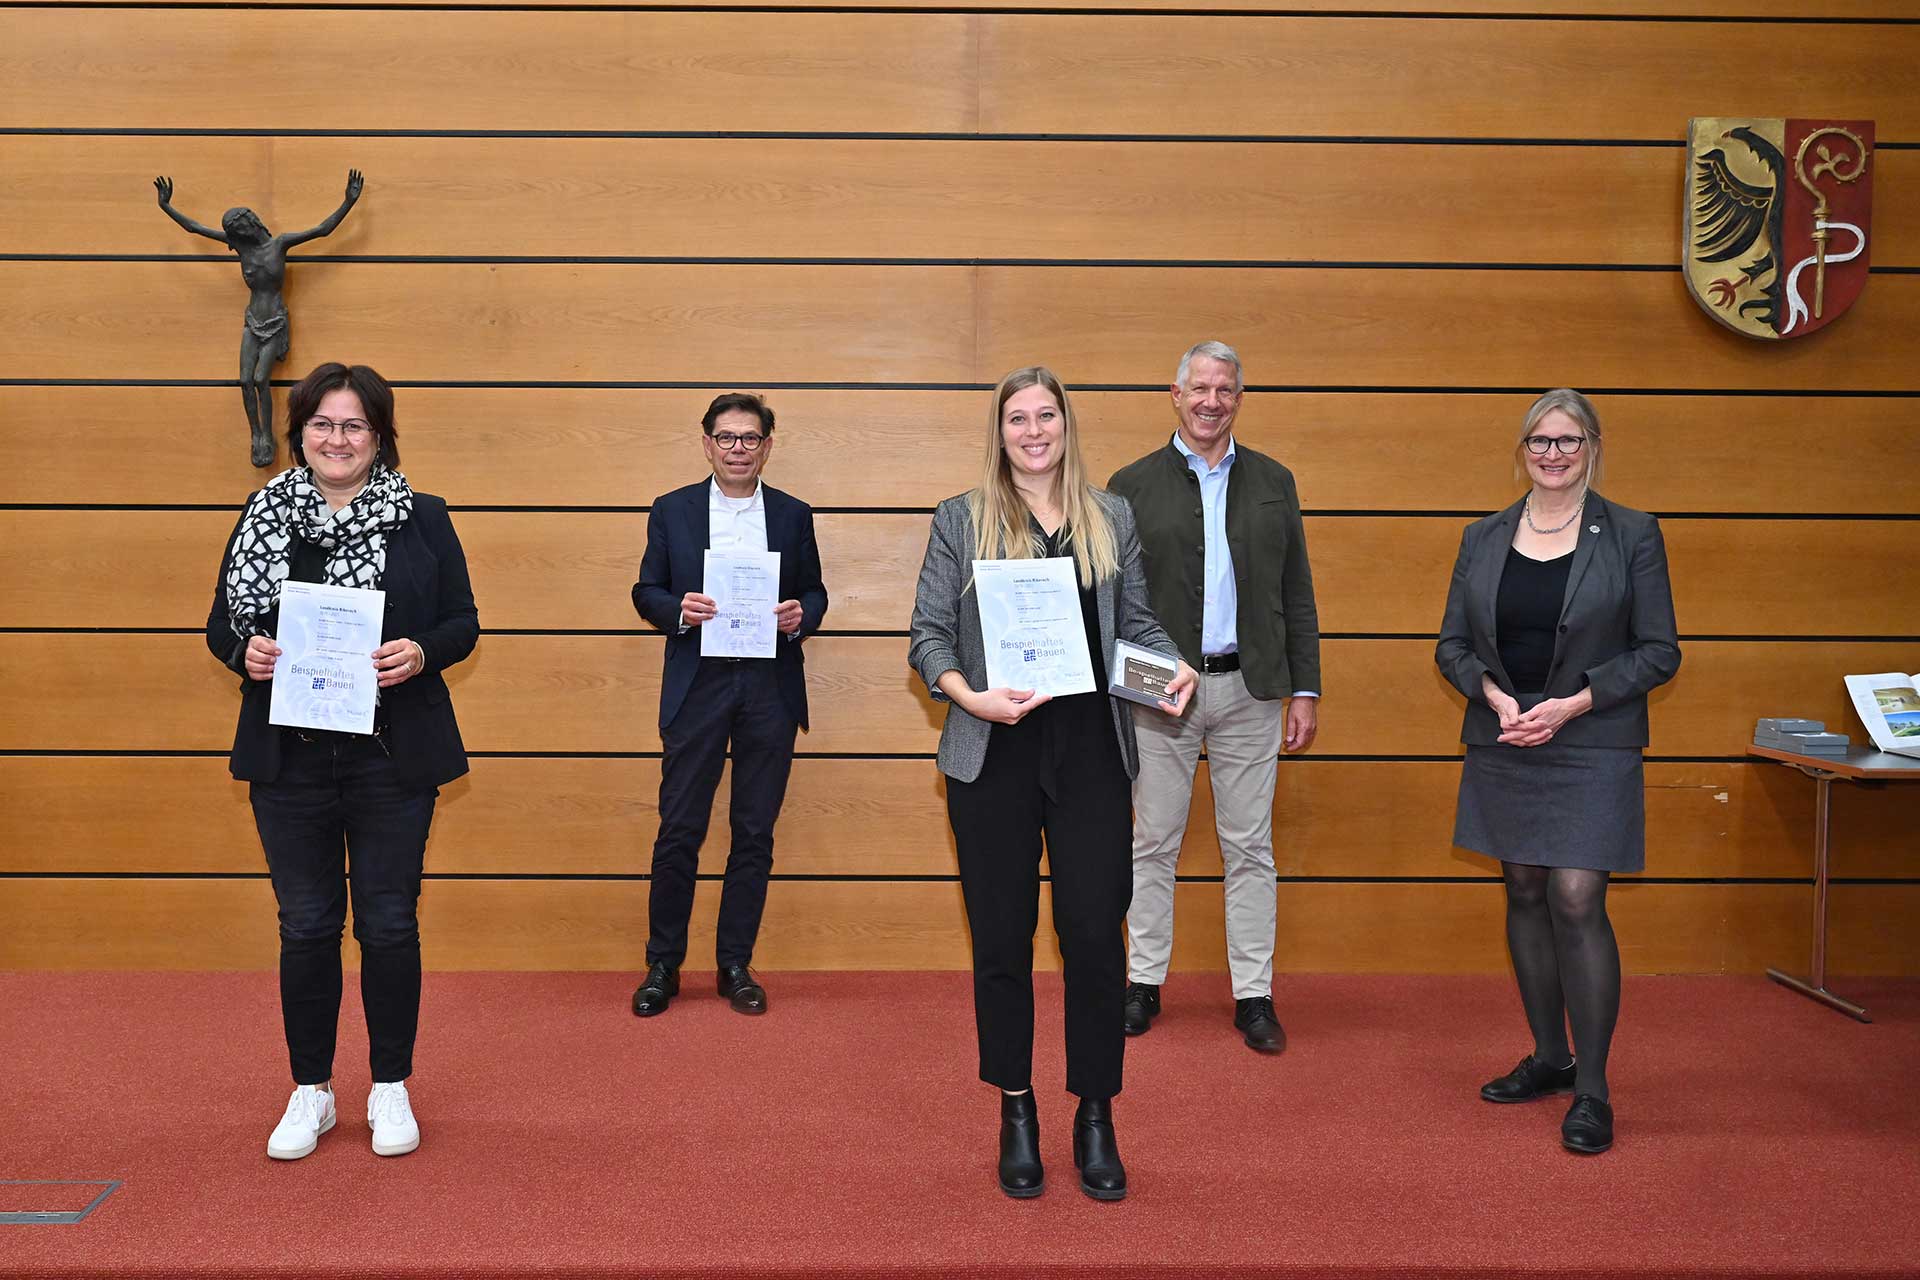 The architects Nicole Kurz and Günther Kerler as well as Manuela Schmid representing the BLANK group of companies together with District Administrator Dr. Heiko Schmid and jury chair Bernadette Siemensmeyer (from left to right) at the award ceremony.